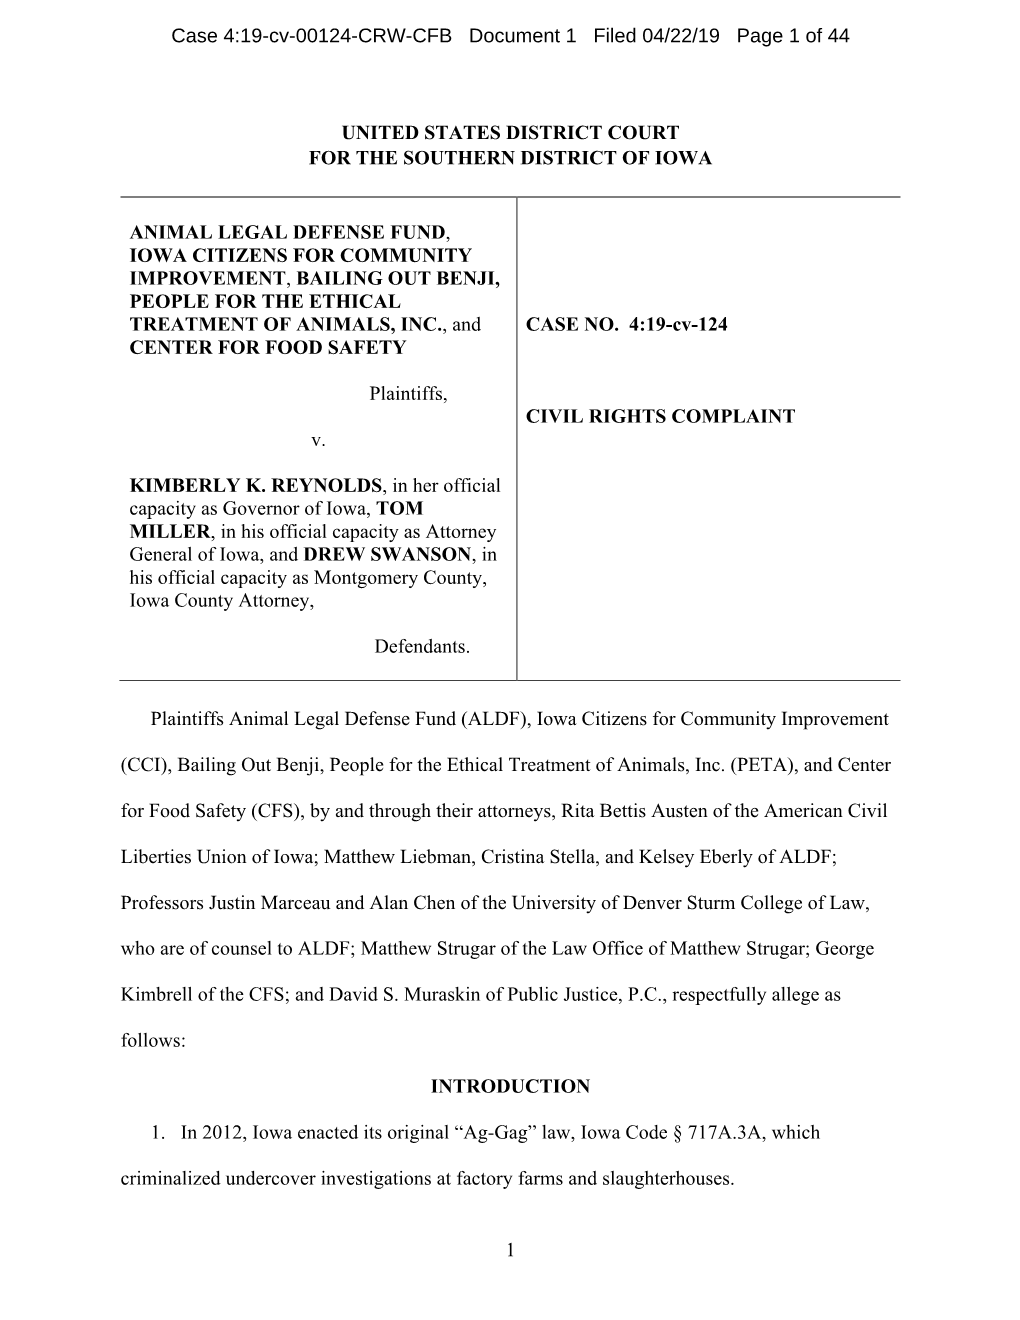 Case 4:19-Cv-00124-CRW-CFB Document 1 Filed 04/22/19 Page 1 of 44